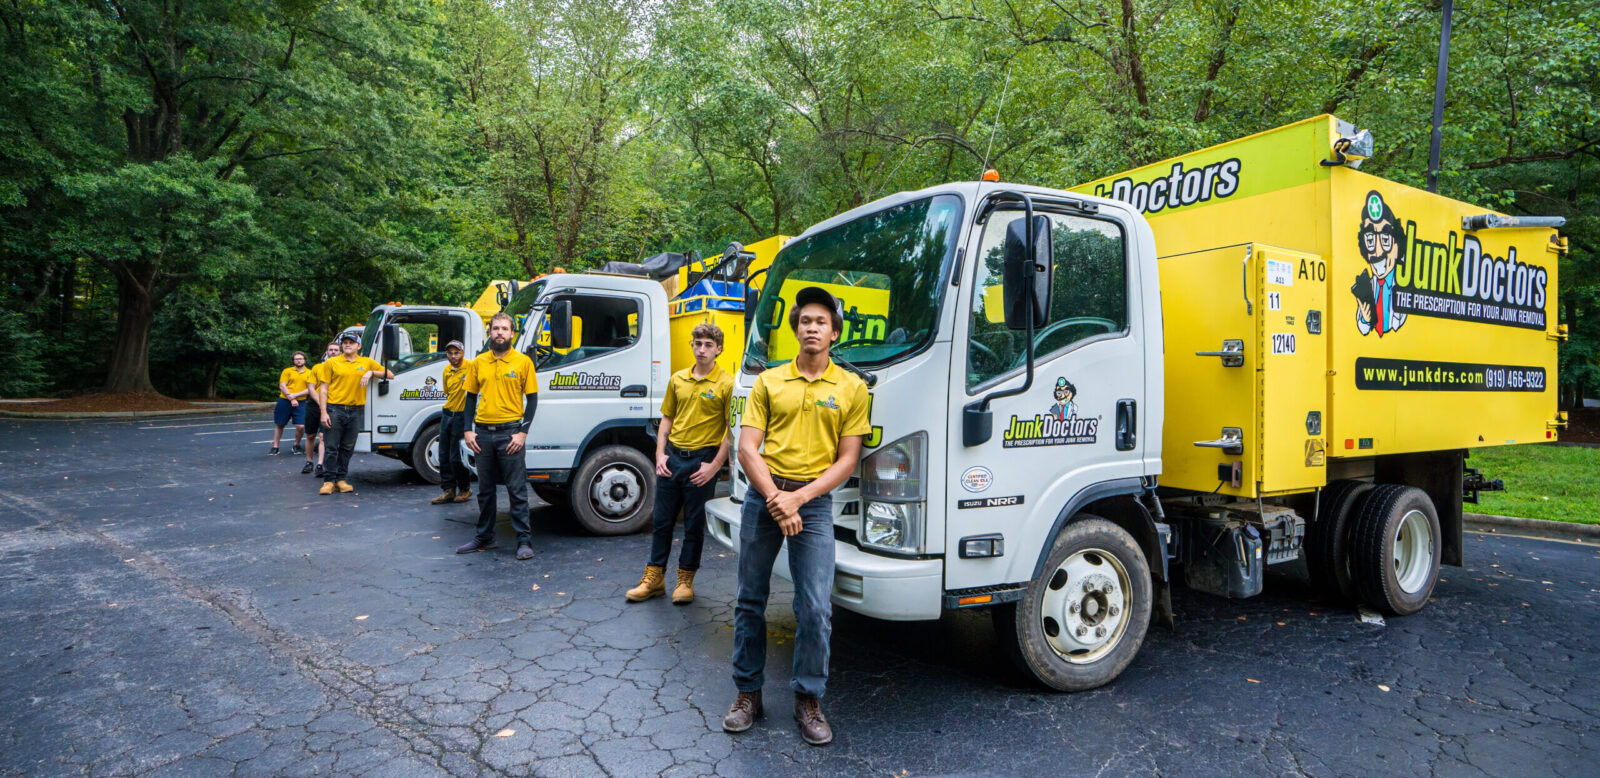 Junk Doctors crew smiling near their junk removal trucks in Youngsville